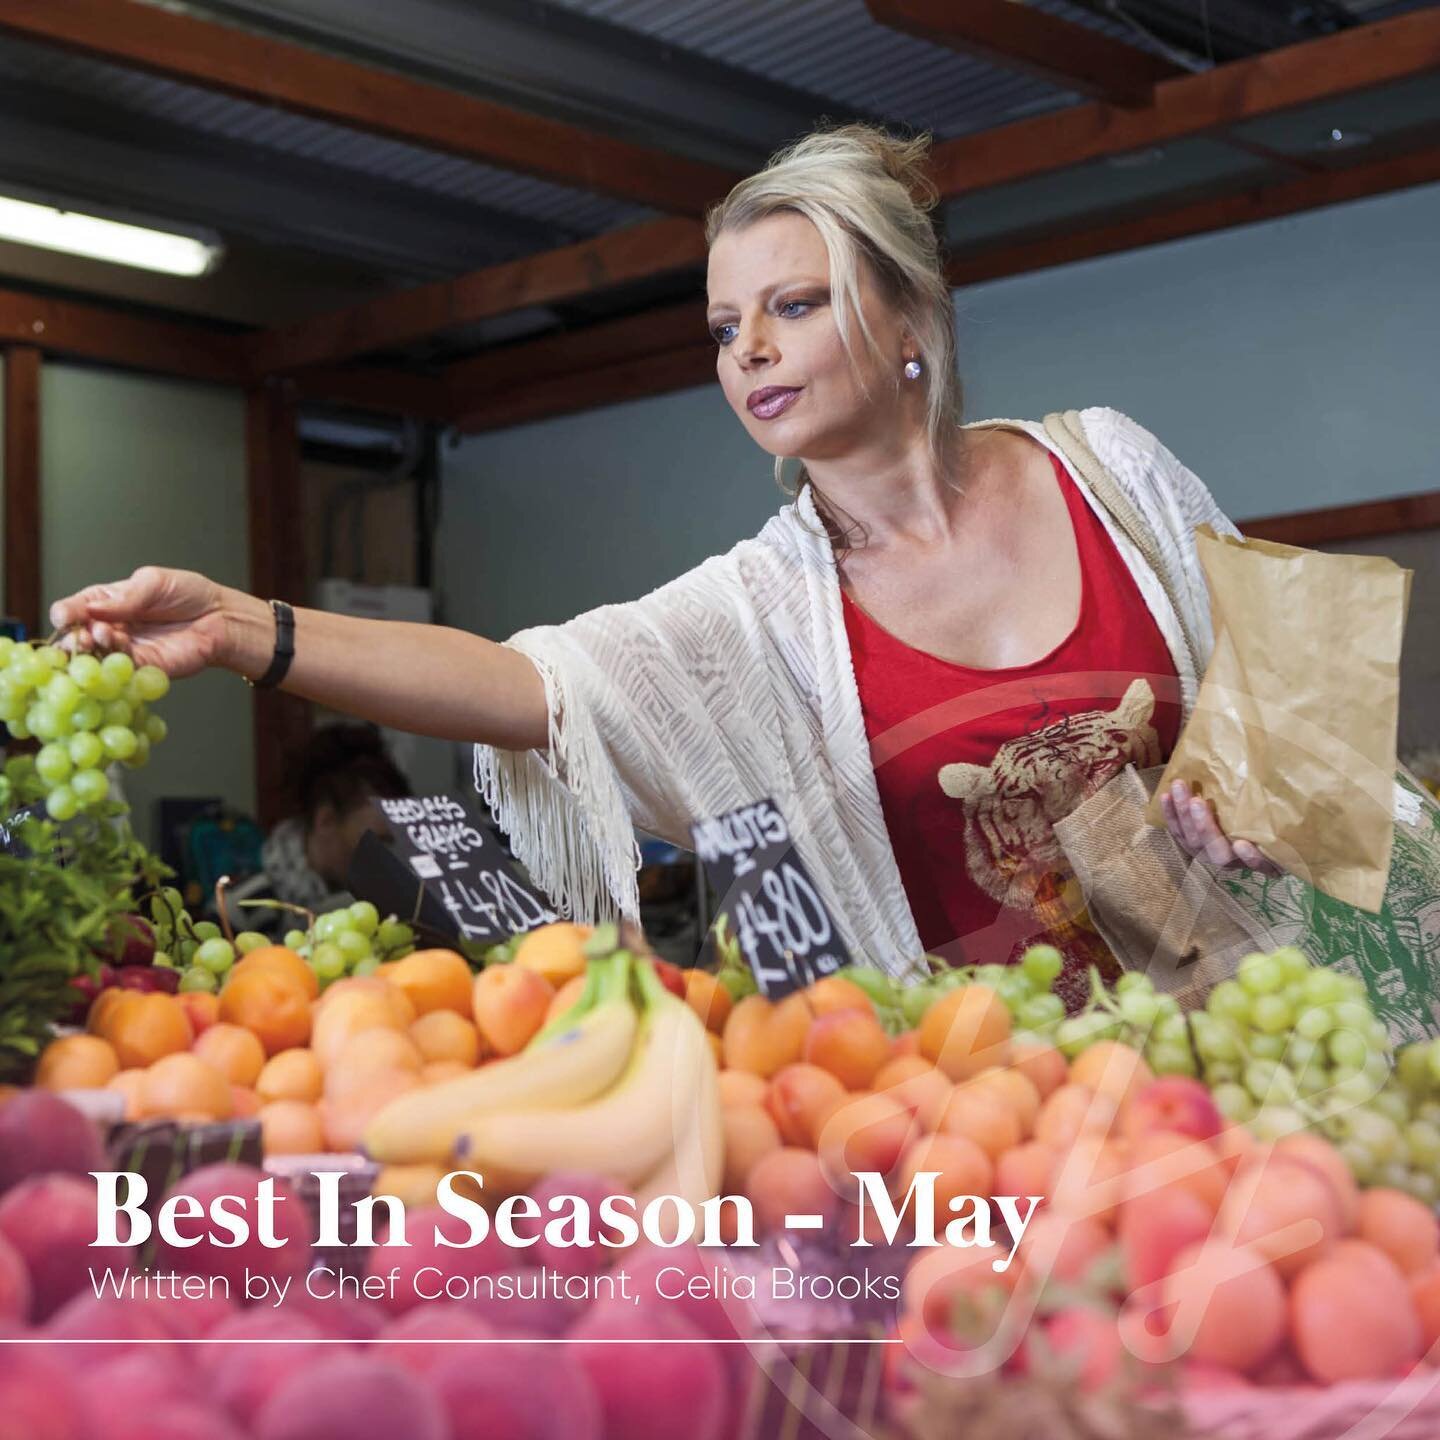 This month's &quot;Best in Season&quot; blog written by chef consultant and food writer Celia Brooks is all about rhubarb featuring a delicious recipe from her recipe book, New Urban Farmer.
 
Link in Bio. Read more here: http://ow.ly/M0kn50OmvnO
 
F